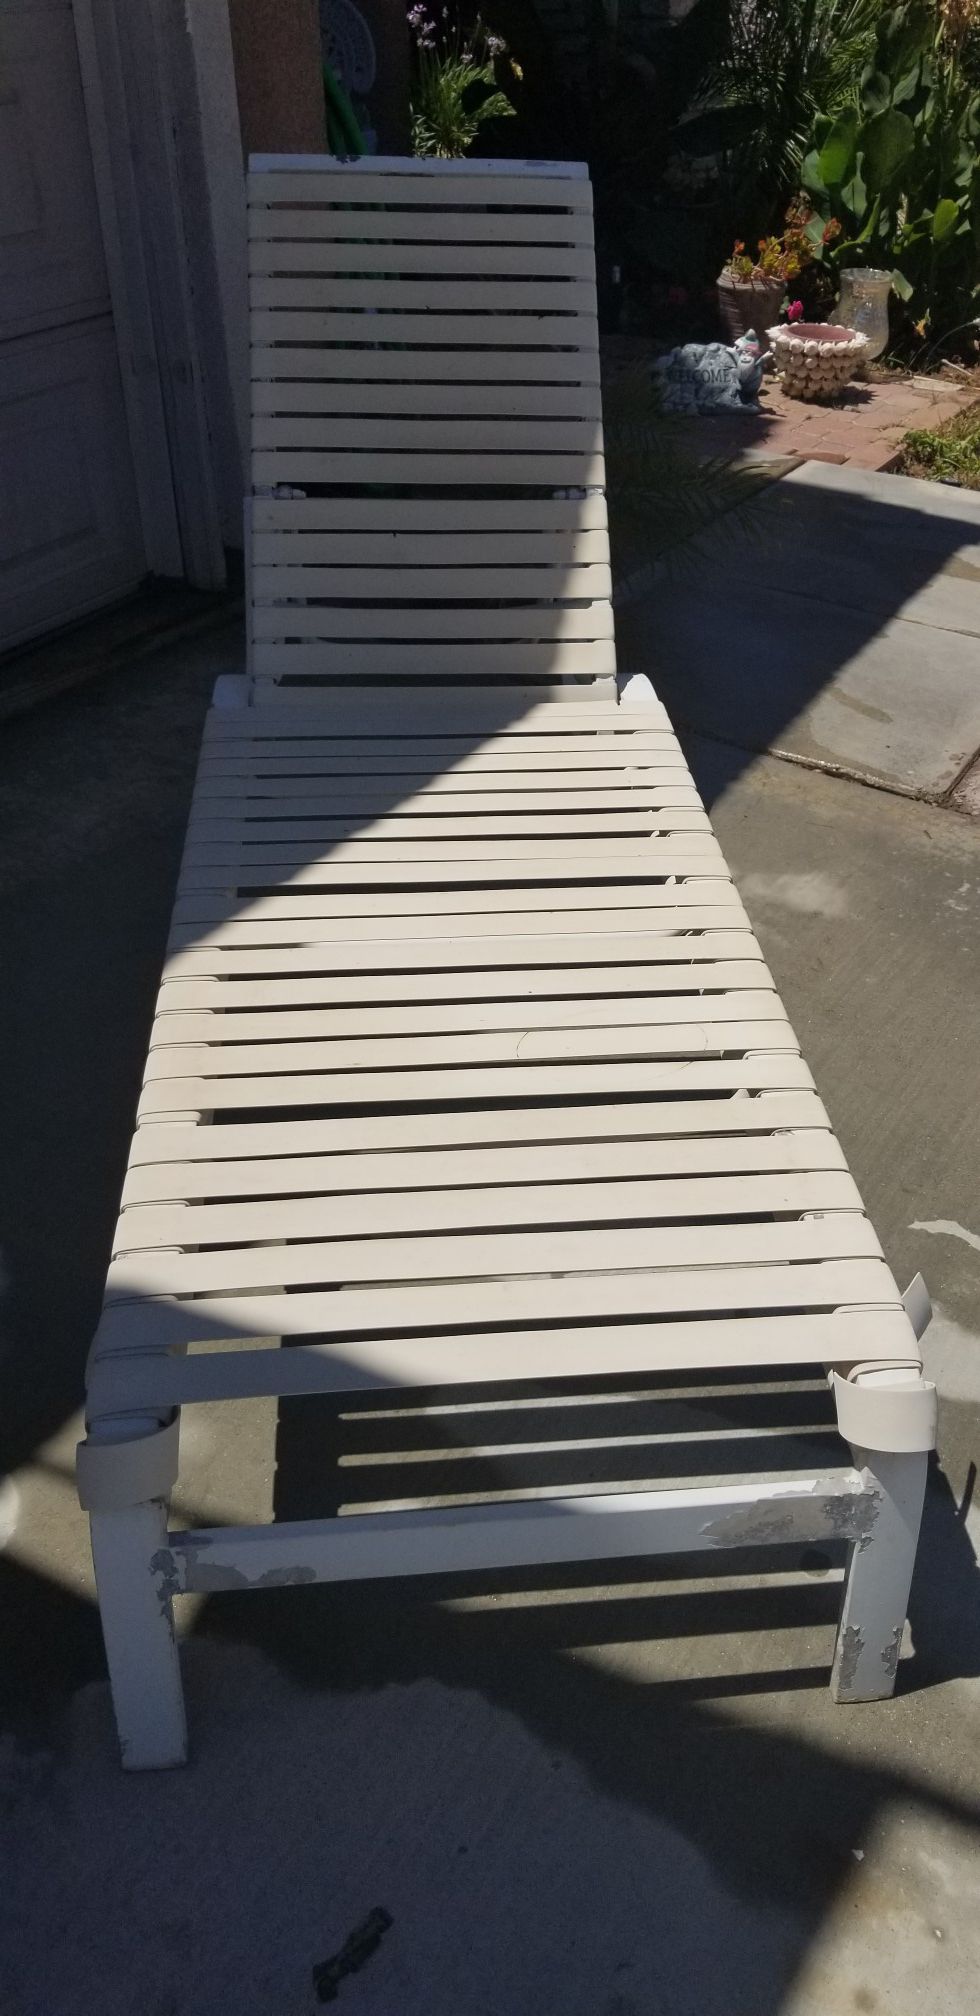 2 pool chairs fair condition pick up today firm price serious buyers only